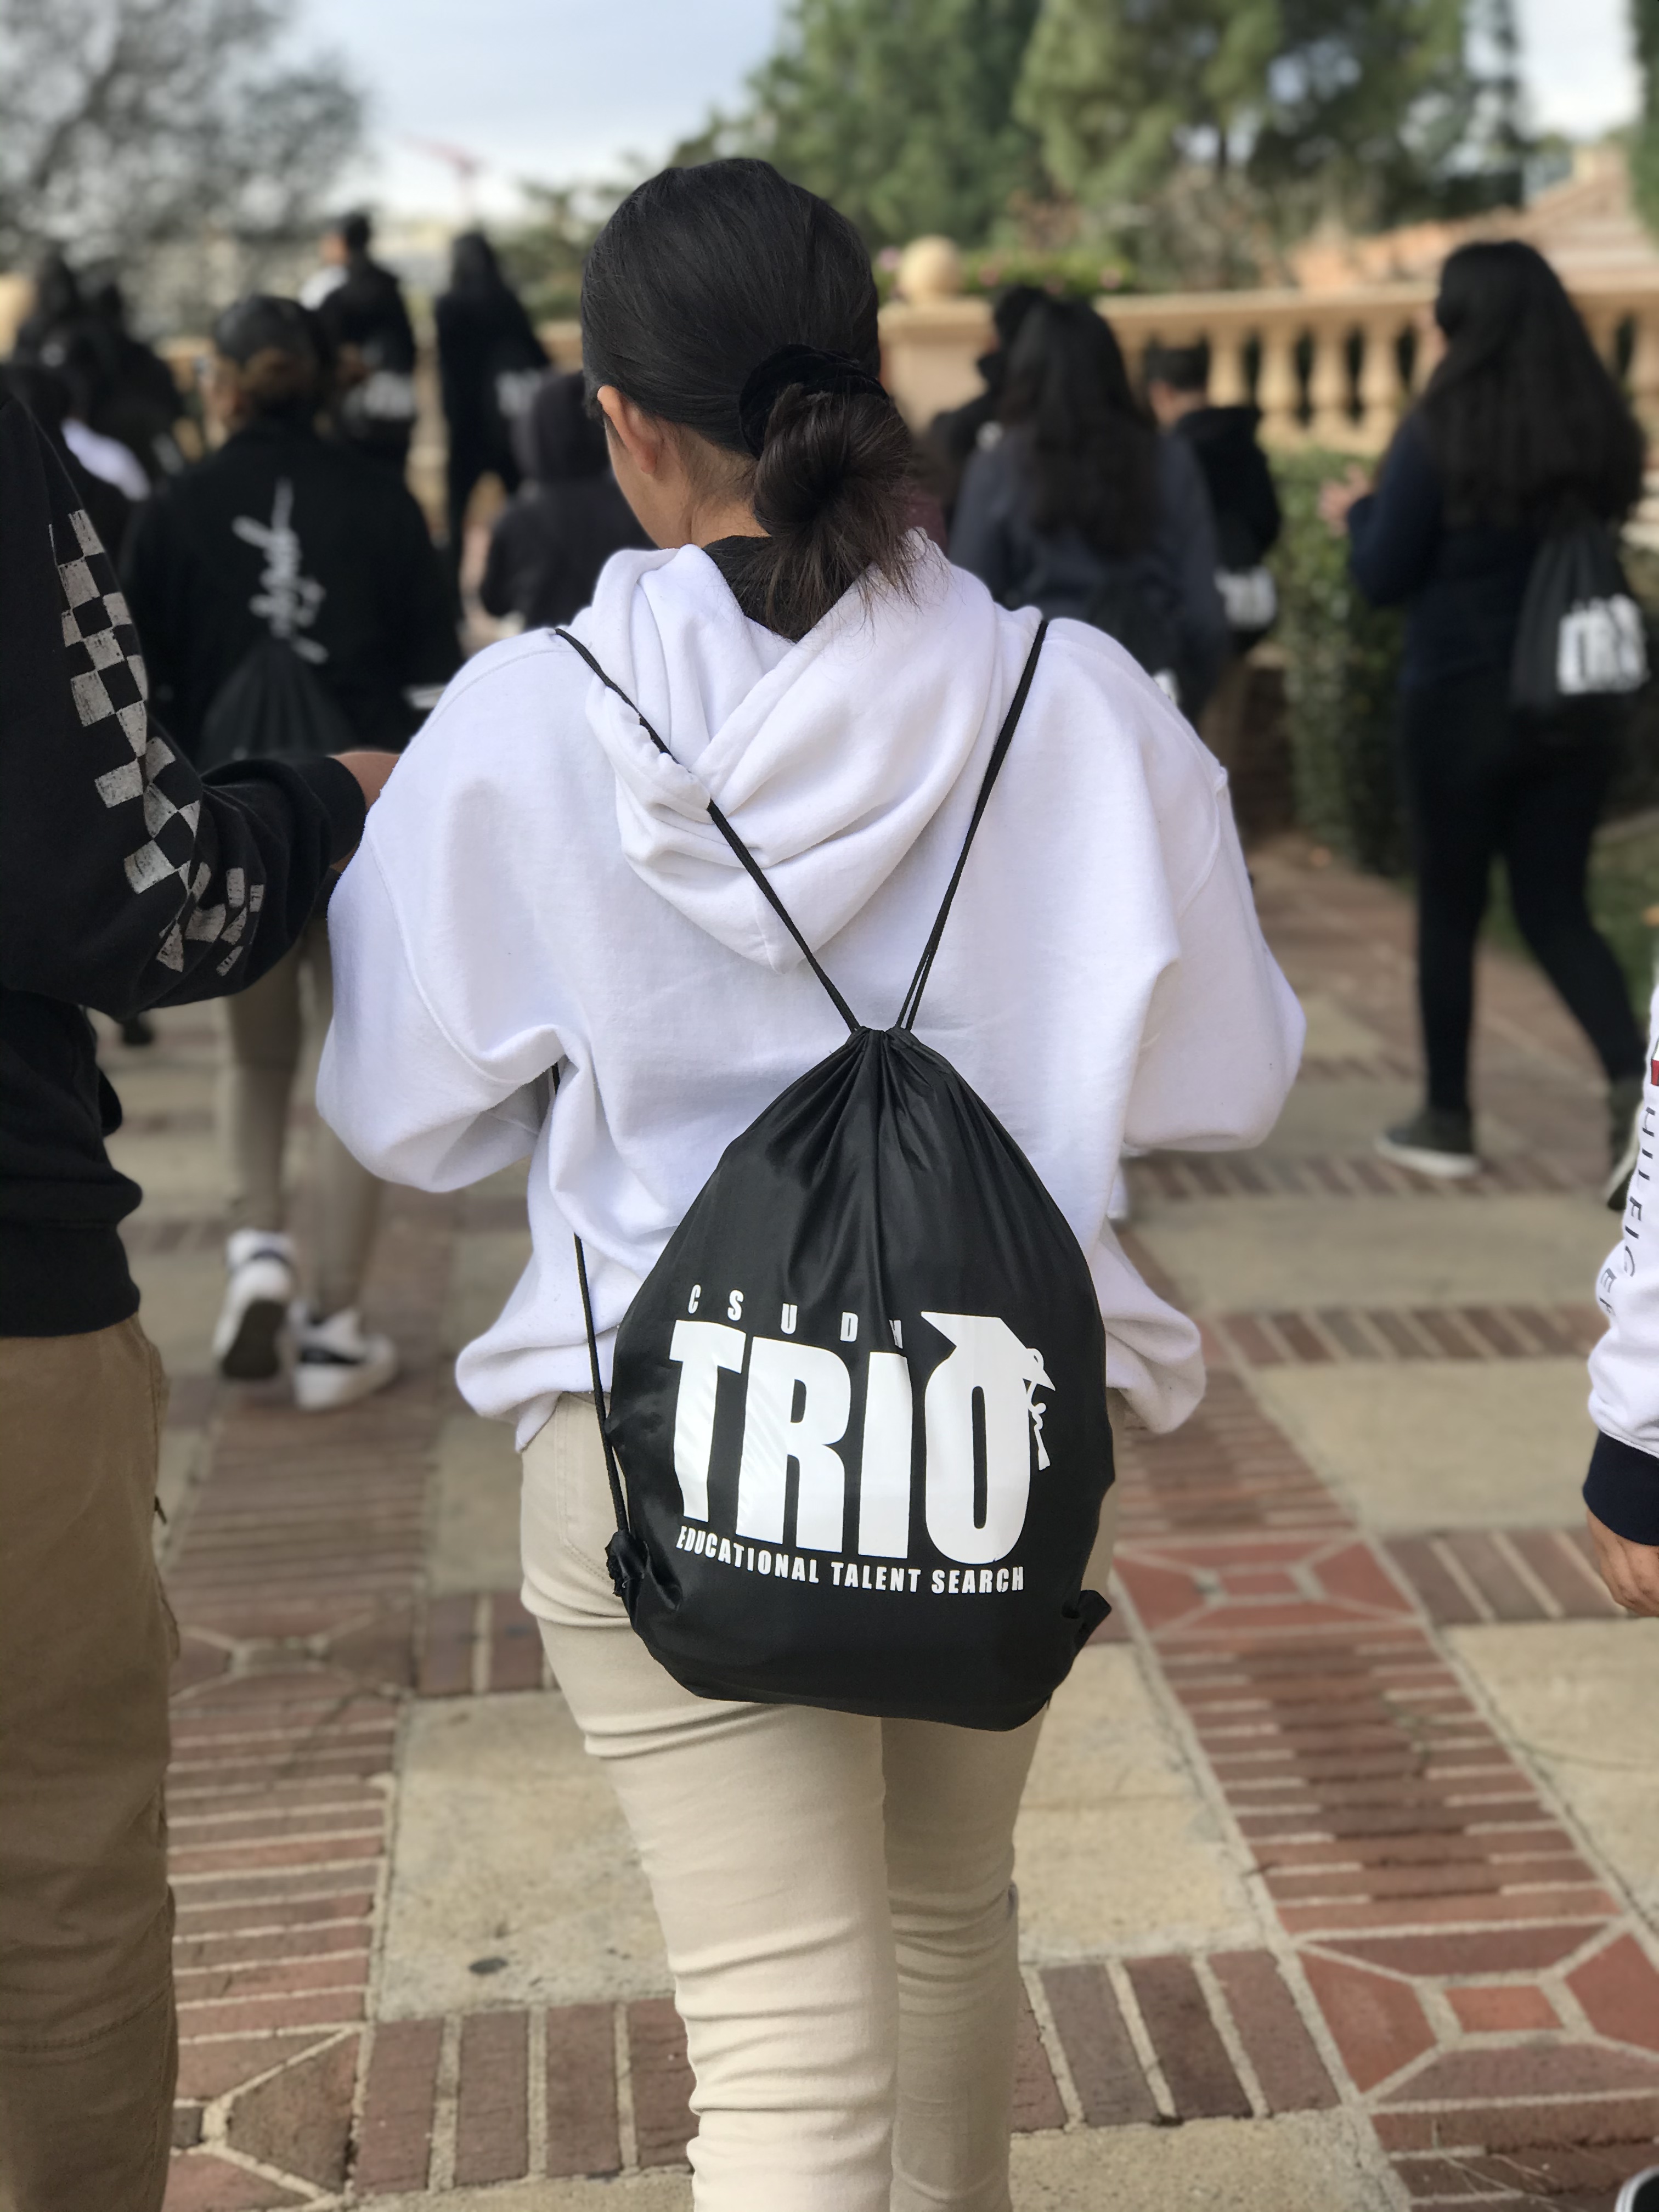 CSUDH-ETS Student Participant wearing an ETS string bag, as they walk on a path at a university.